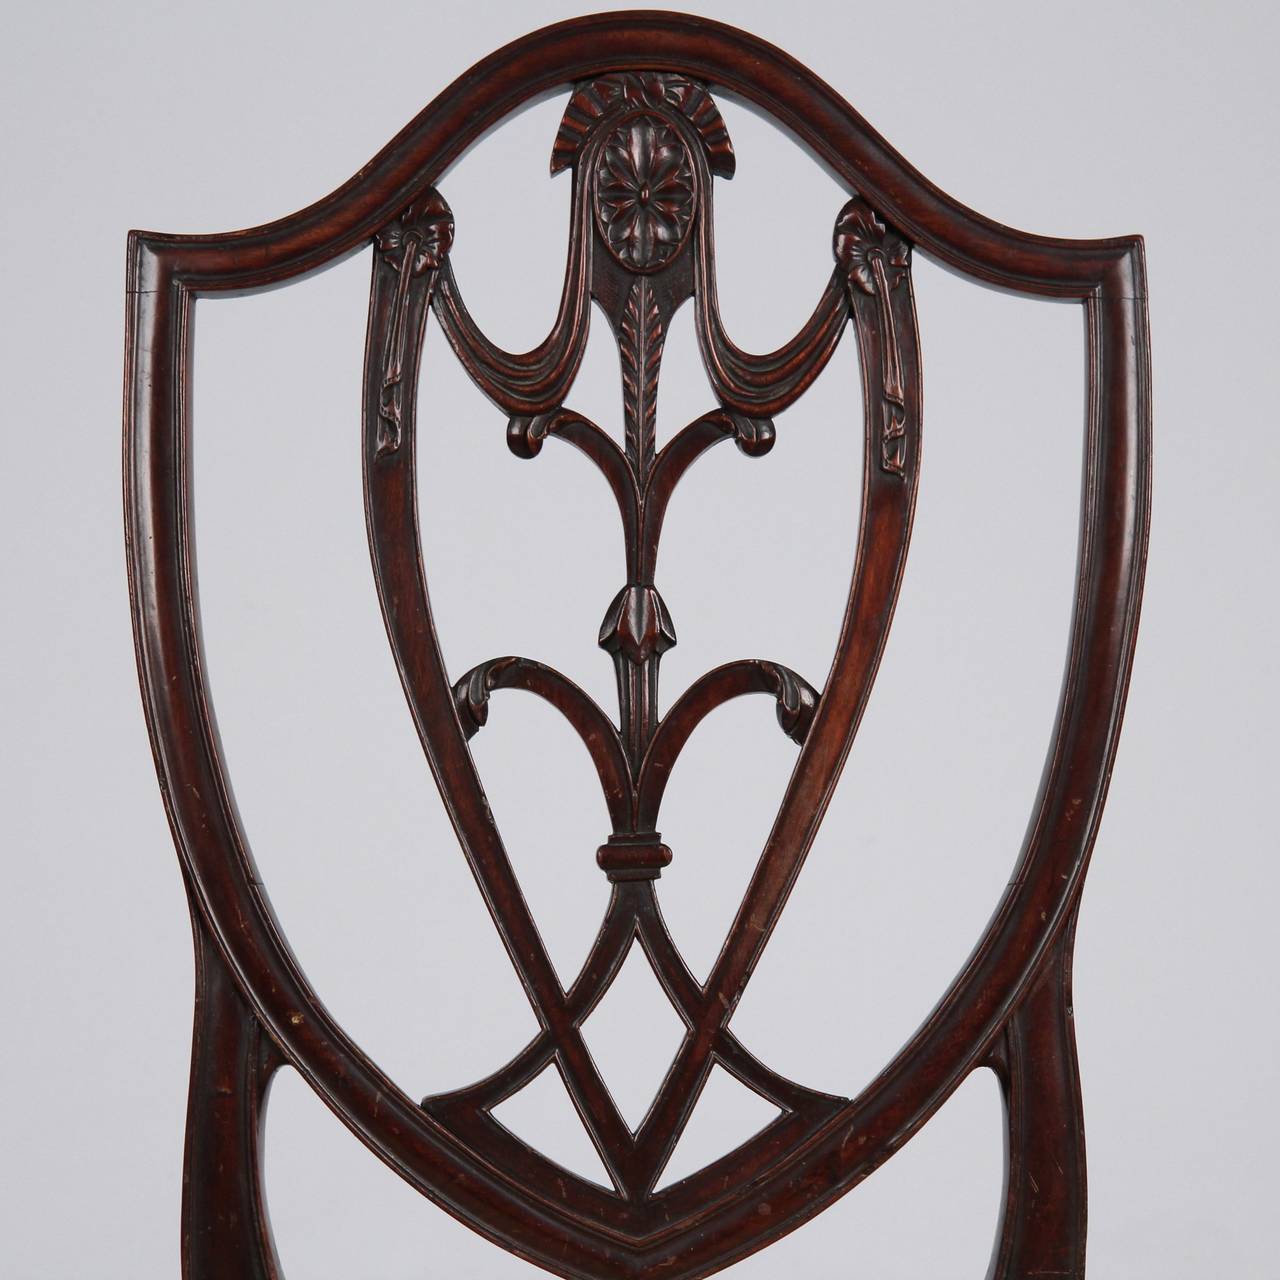 RARE AND EXCEEDINGLY FINE AMERICAN FEDERAL CARVED MAHOGANY SIDE CHAIR
New York c. 1790-1800 with original surface, Inscribed underneath in graphite 